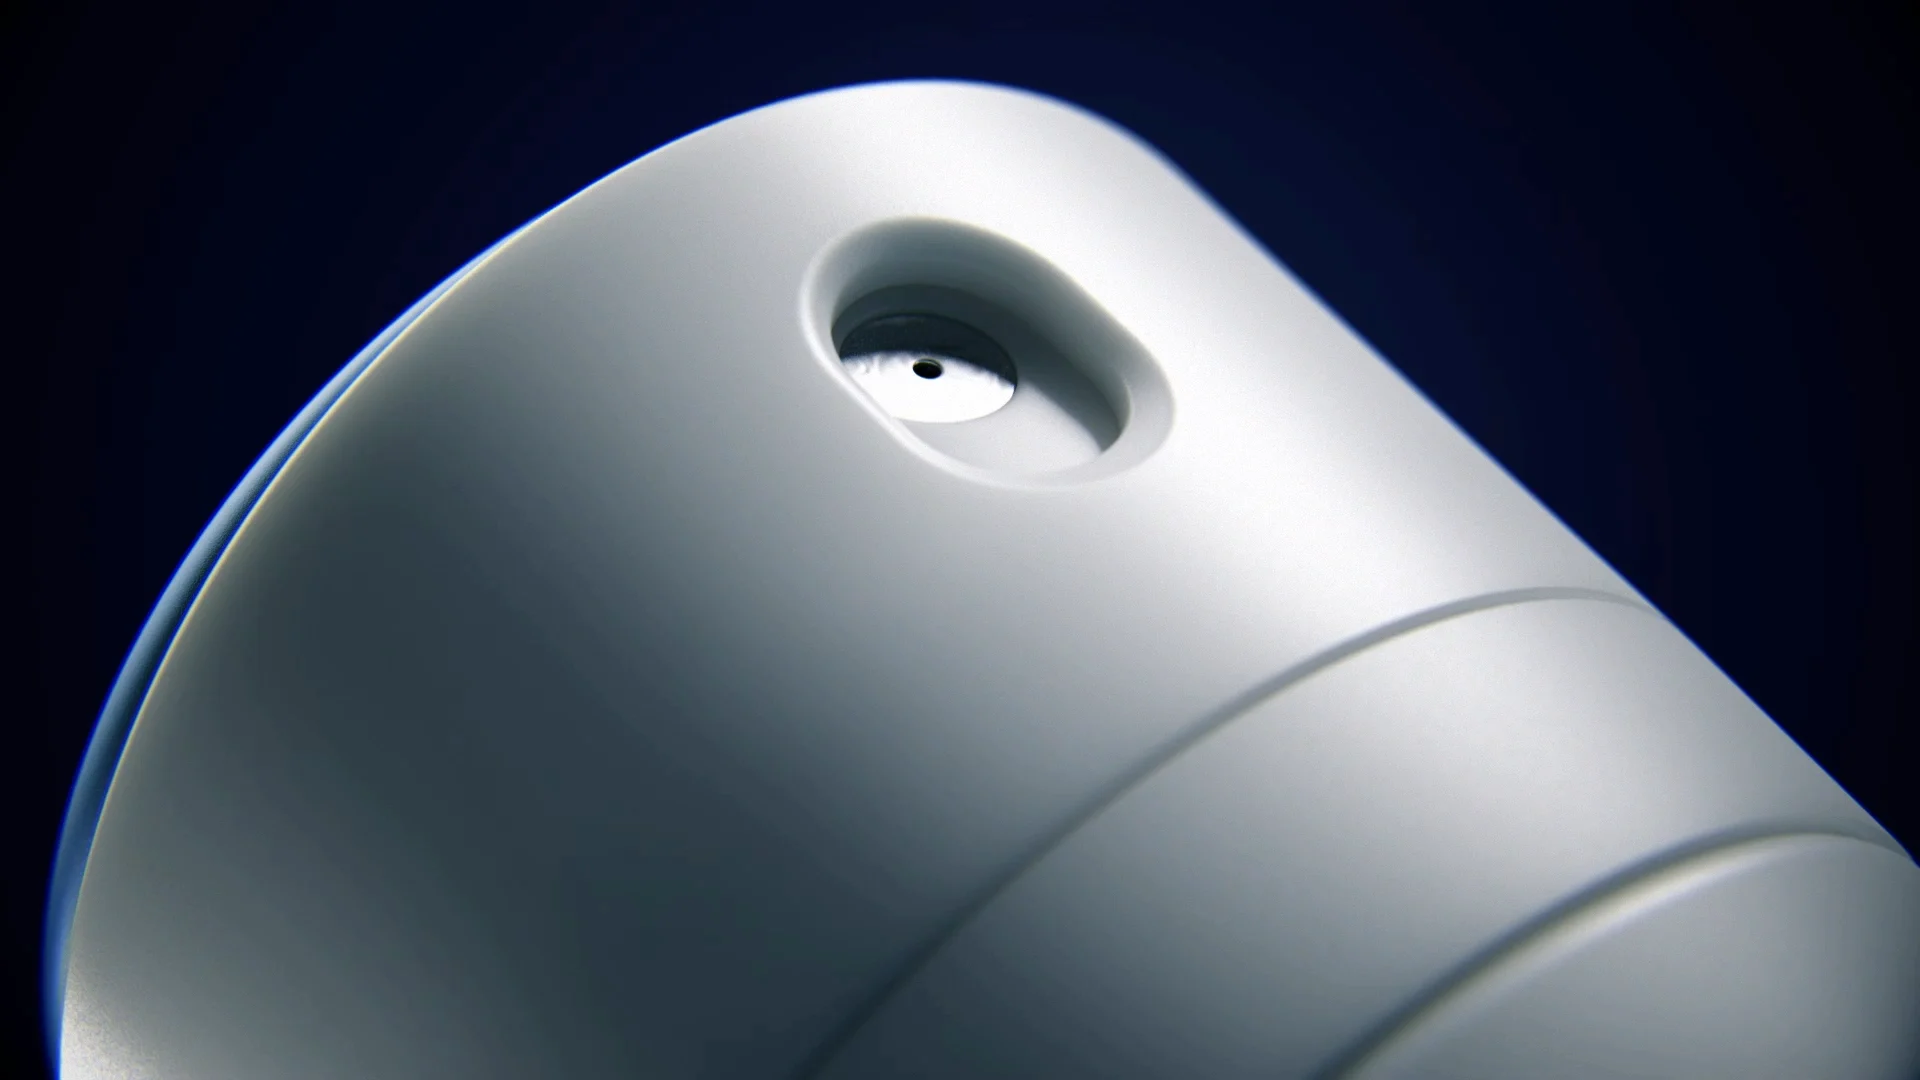 close up of the head of an aerosol packshot with a blue pusher and a white surface